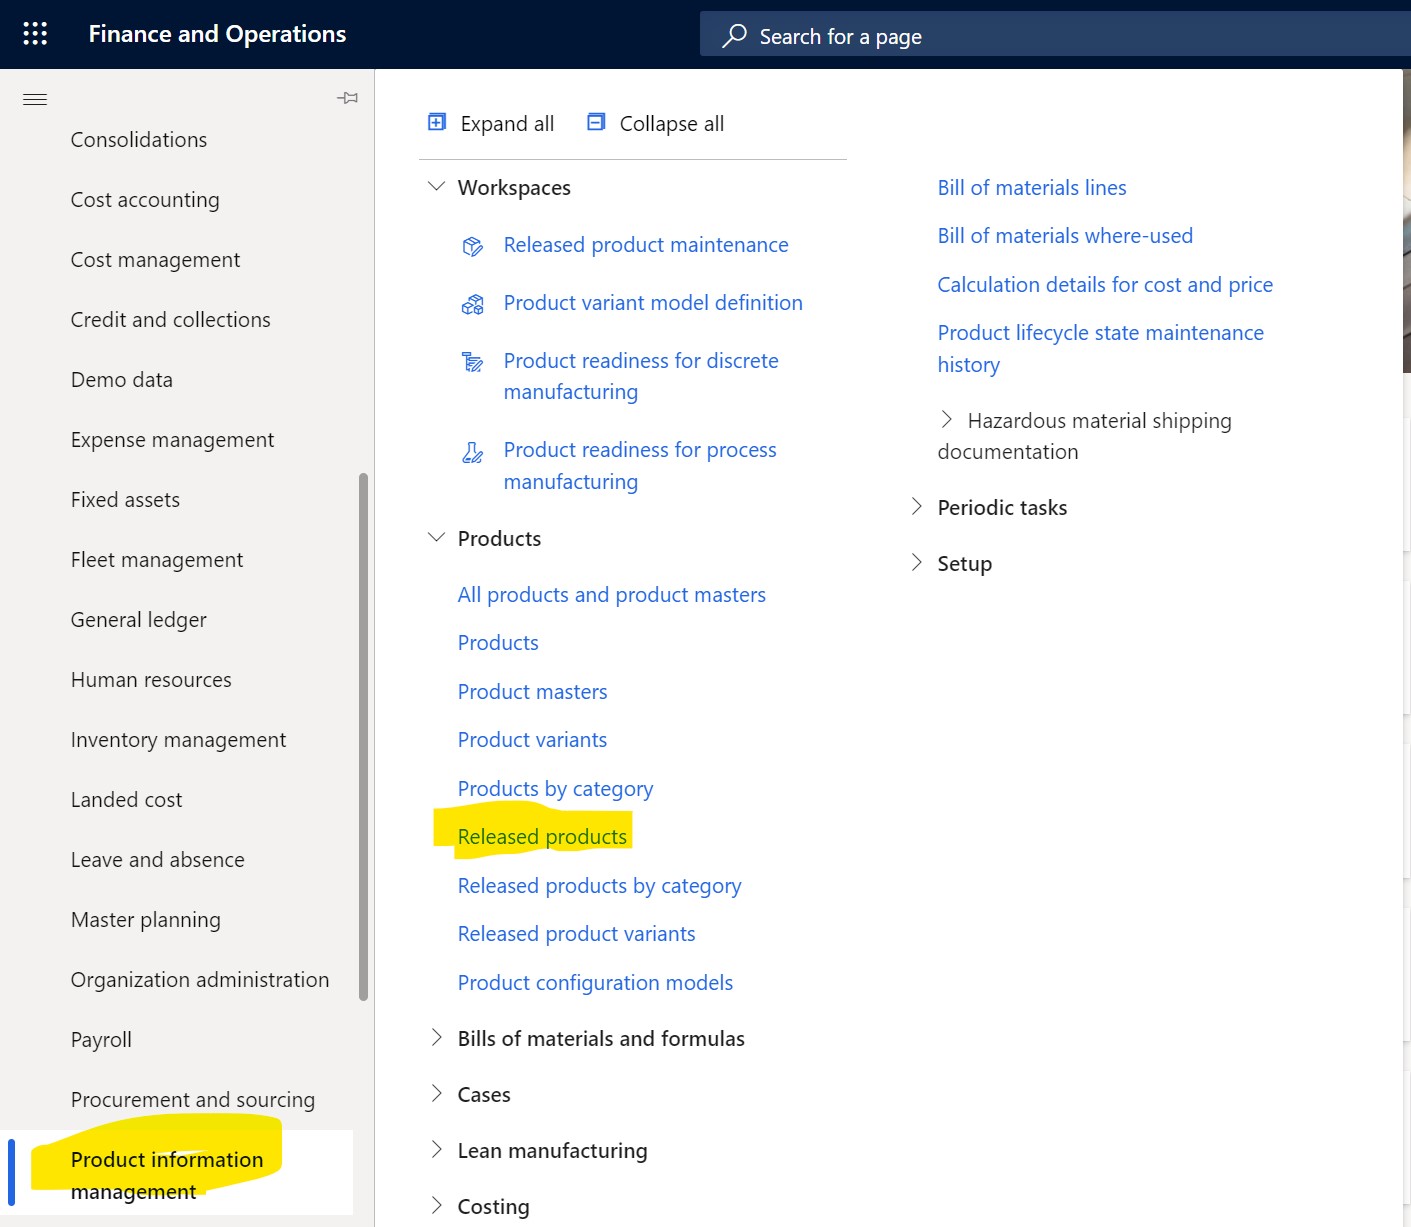 Product information management tab in Dynamics 365 Finance and Operations